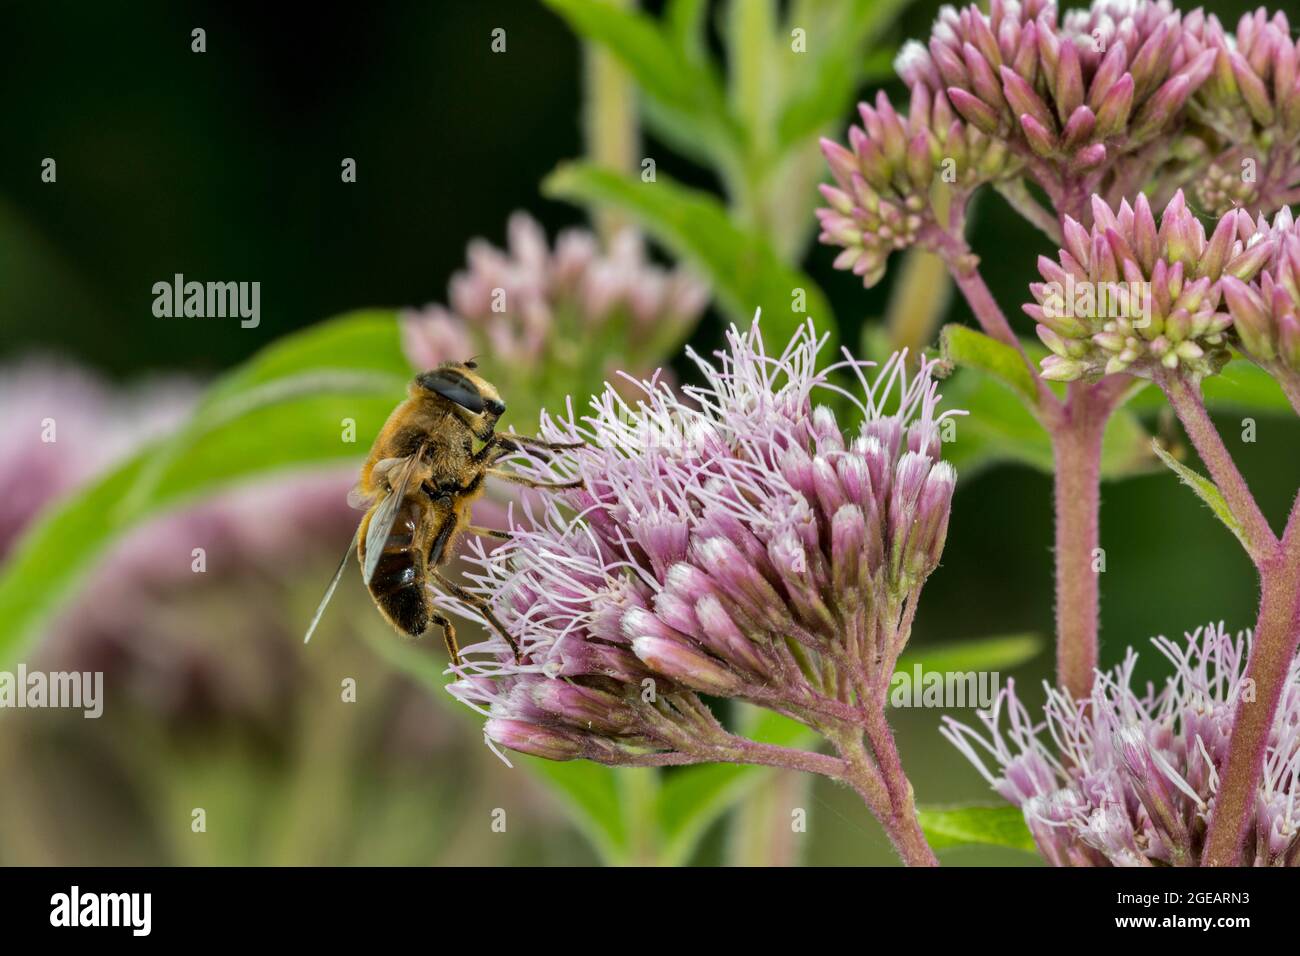 Common drone fly (Eristalis tenax) migratory hoverfly pollinating and feeding on nectar from hemp-agrimony (Eupatorium cannabinum) flower in summer Stock Photo